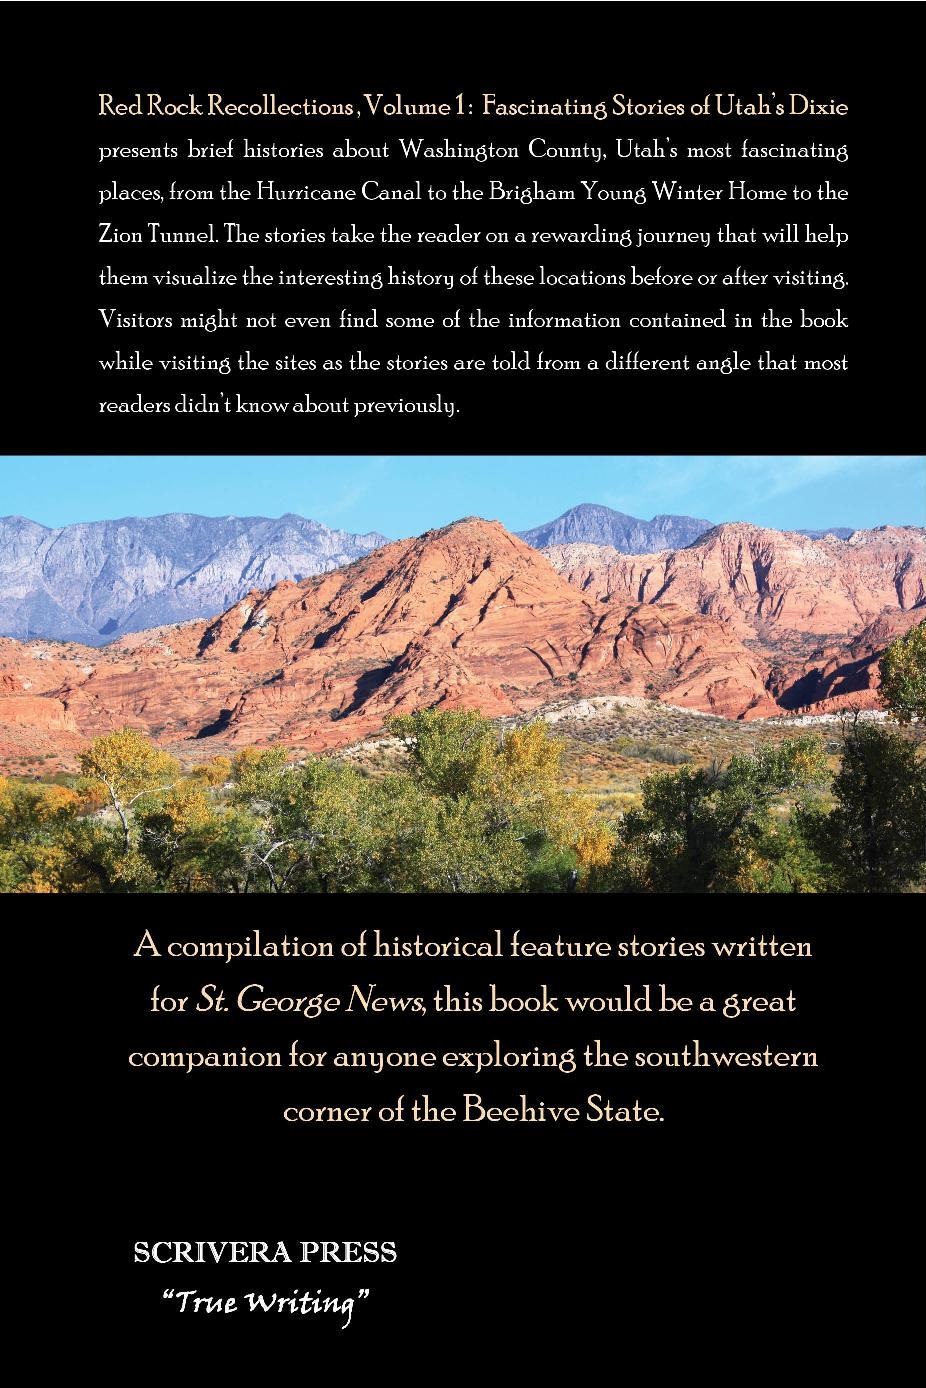 Back cover of Red Rock Recollections, Volume 1